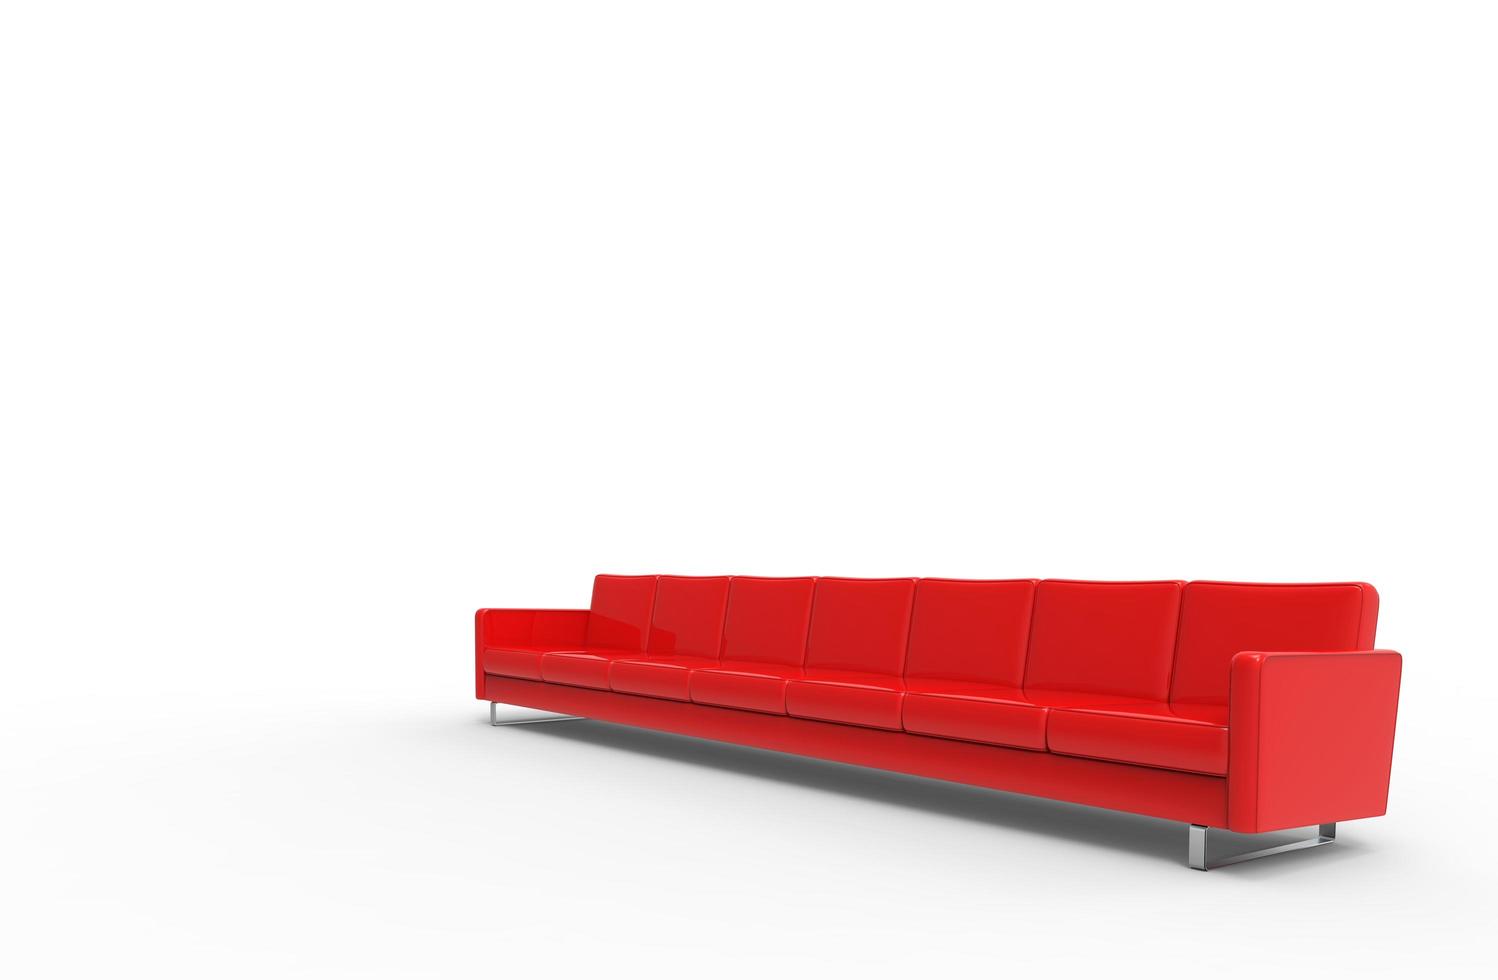 Extremely long red sofa isolated on white background. 3d rendering3d rendering photo